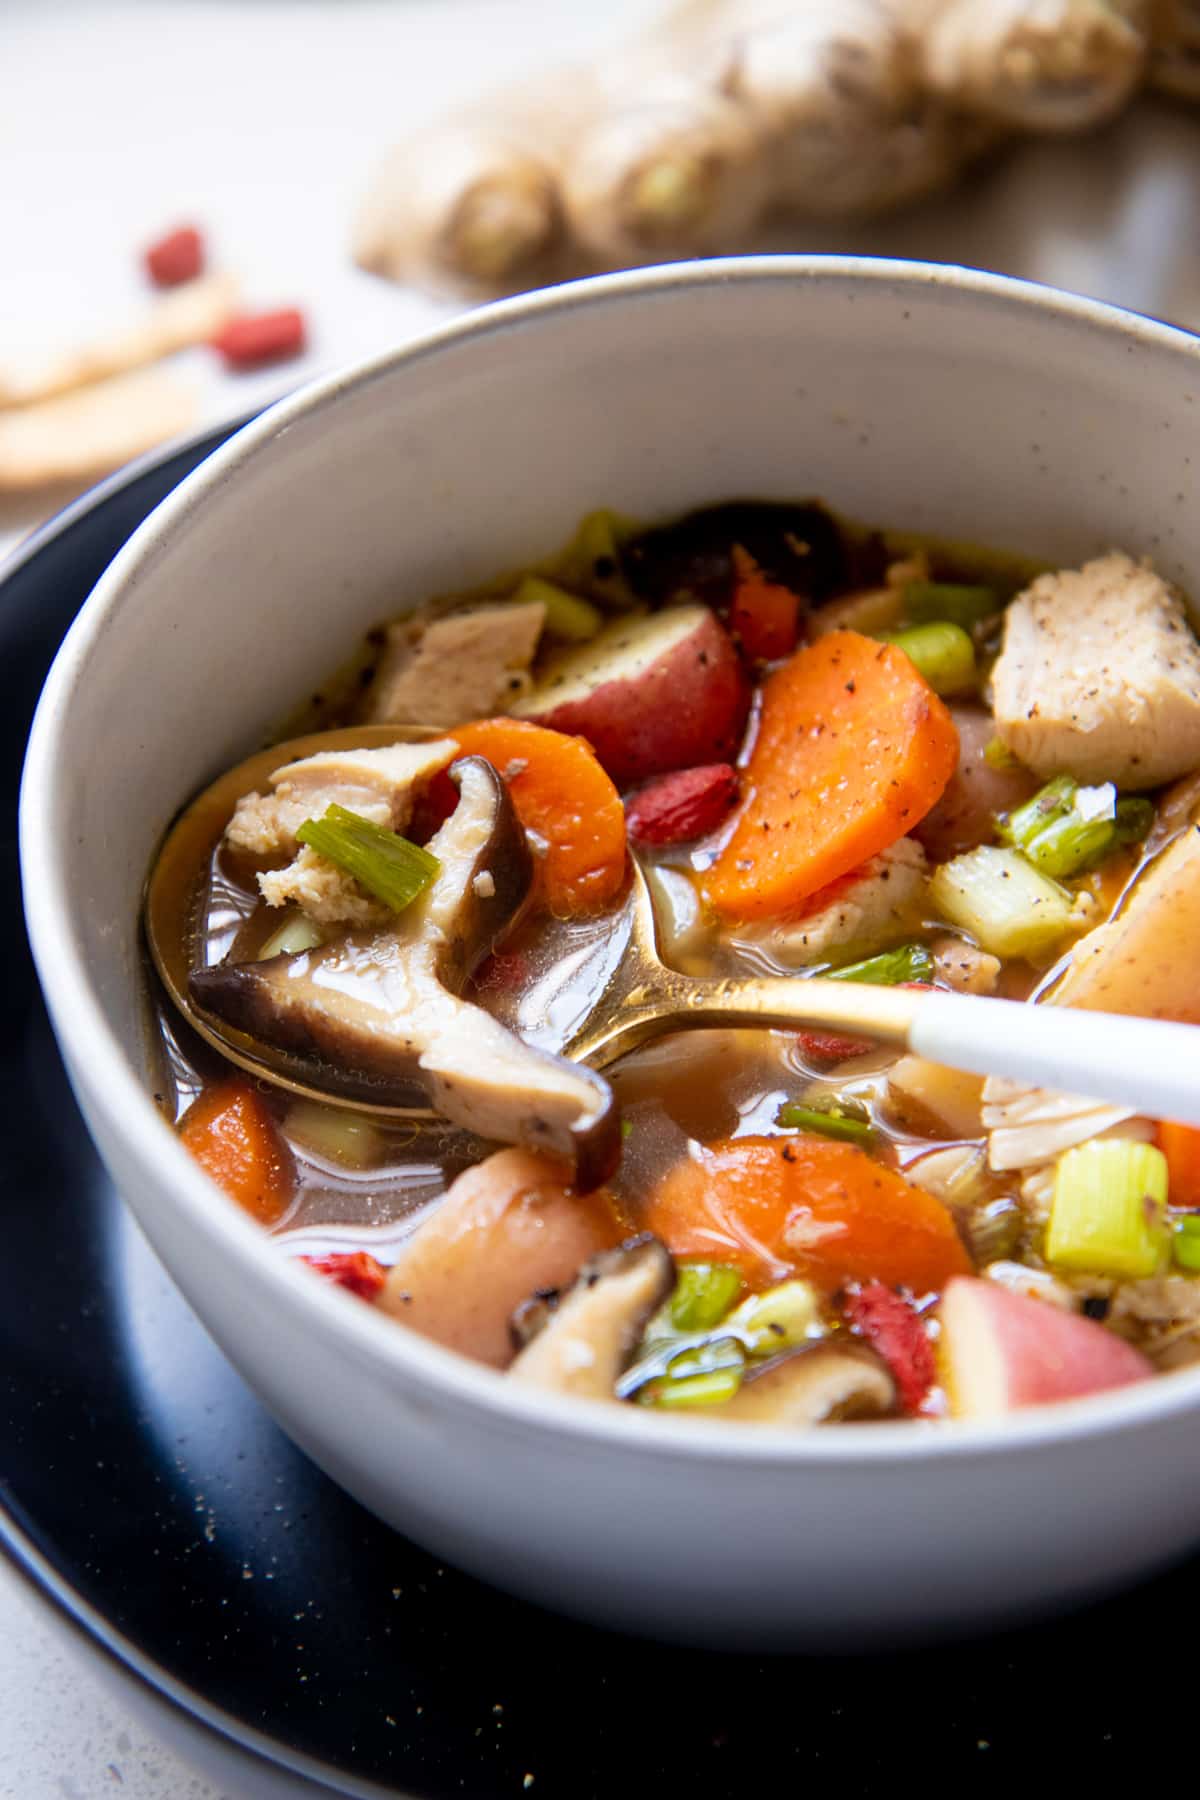 A spoon dips into a bowl full of soup broth, chicken, vegetables, and Chinese herbs.